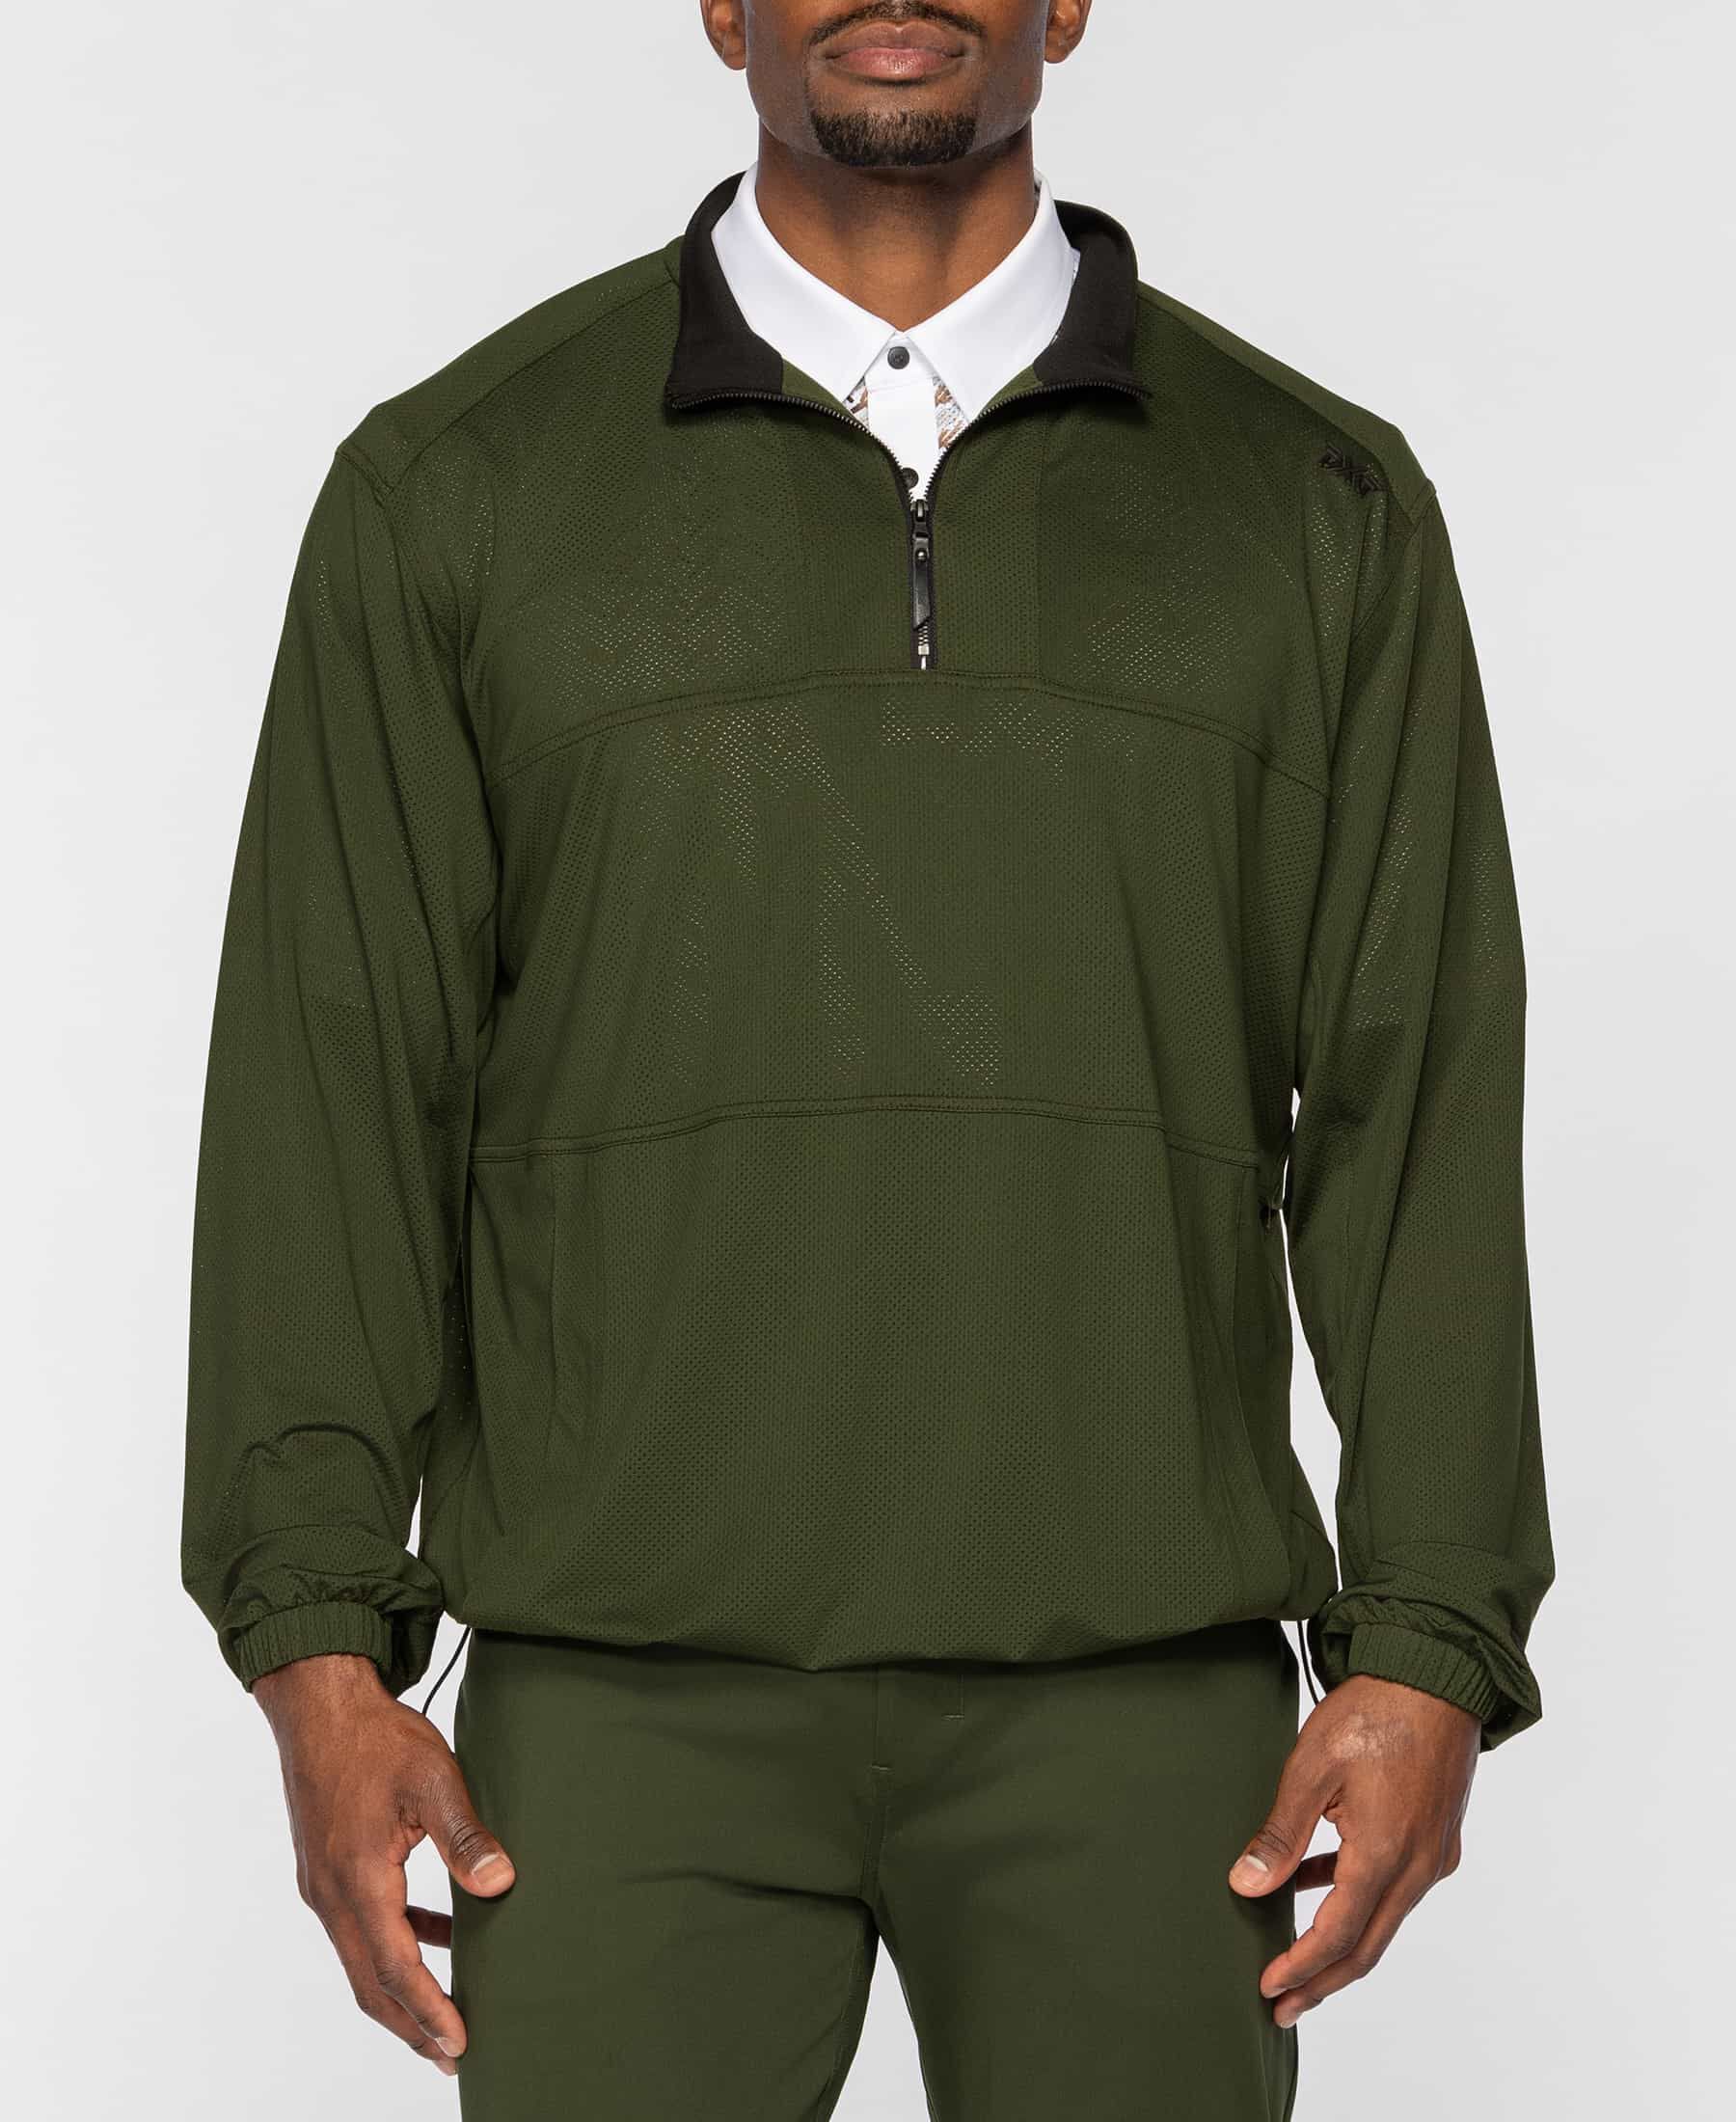 Perforated Jersey 1/4 Zip Pullover | Men's Golf Pullovers | PXG